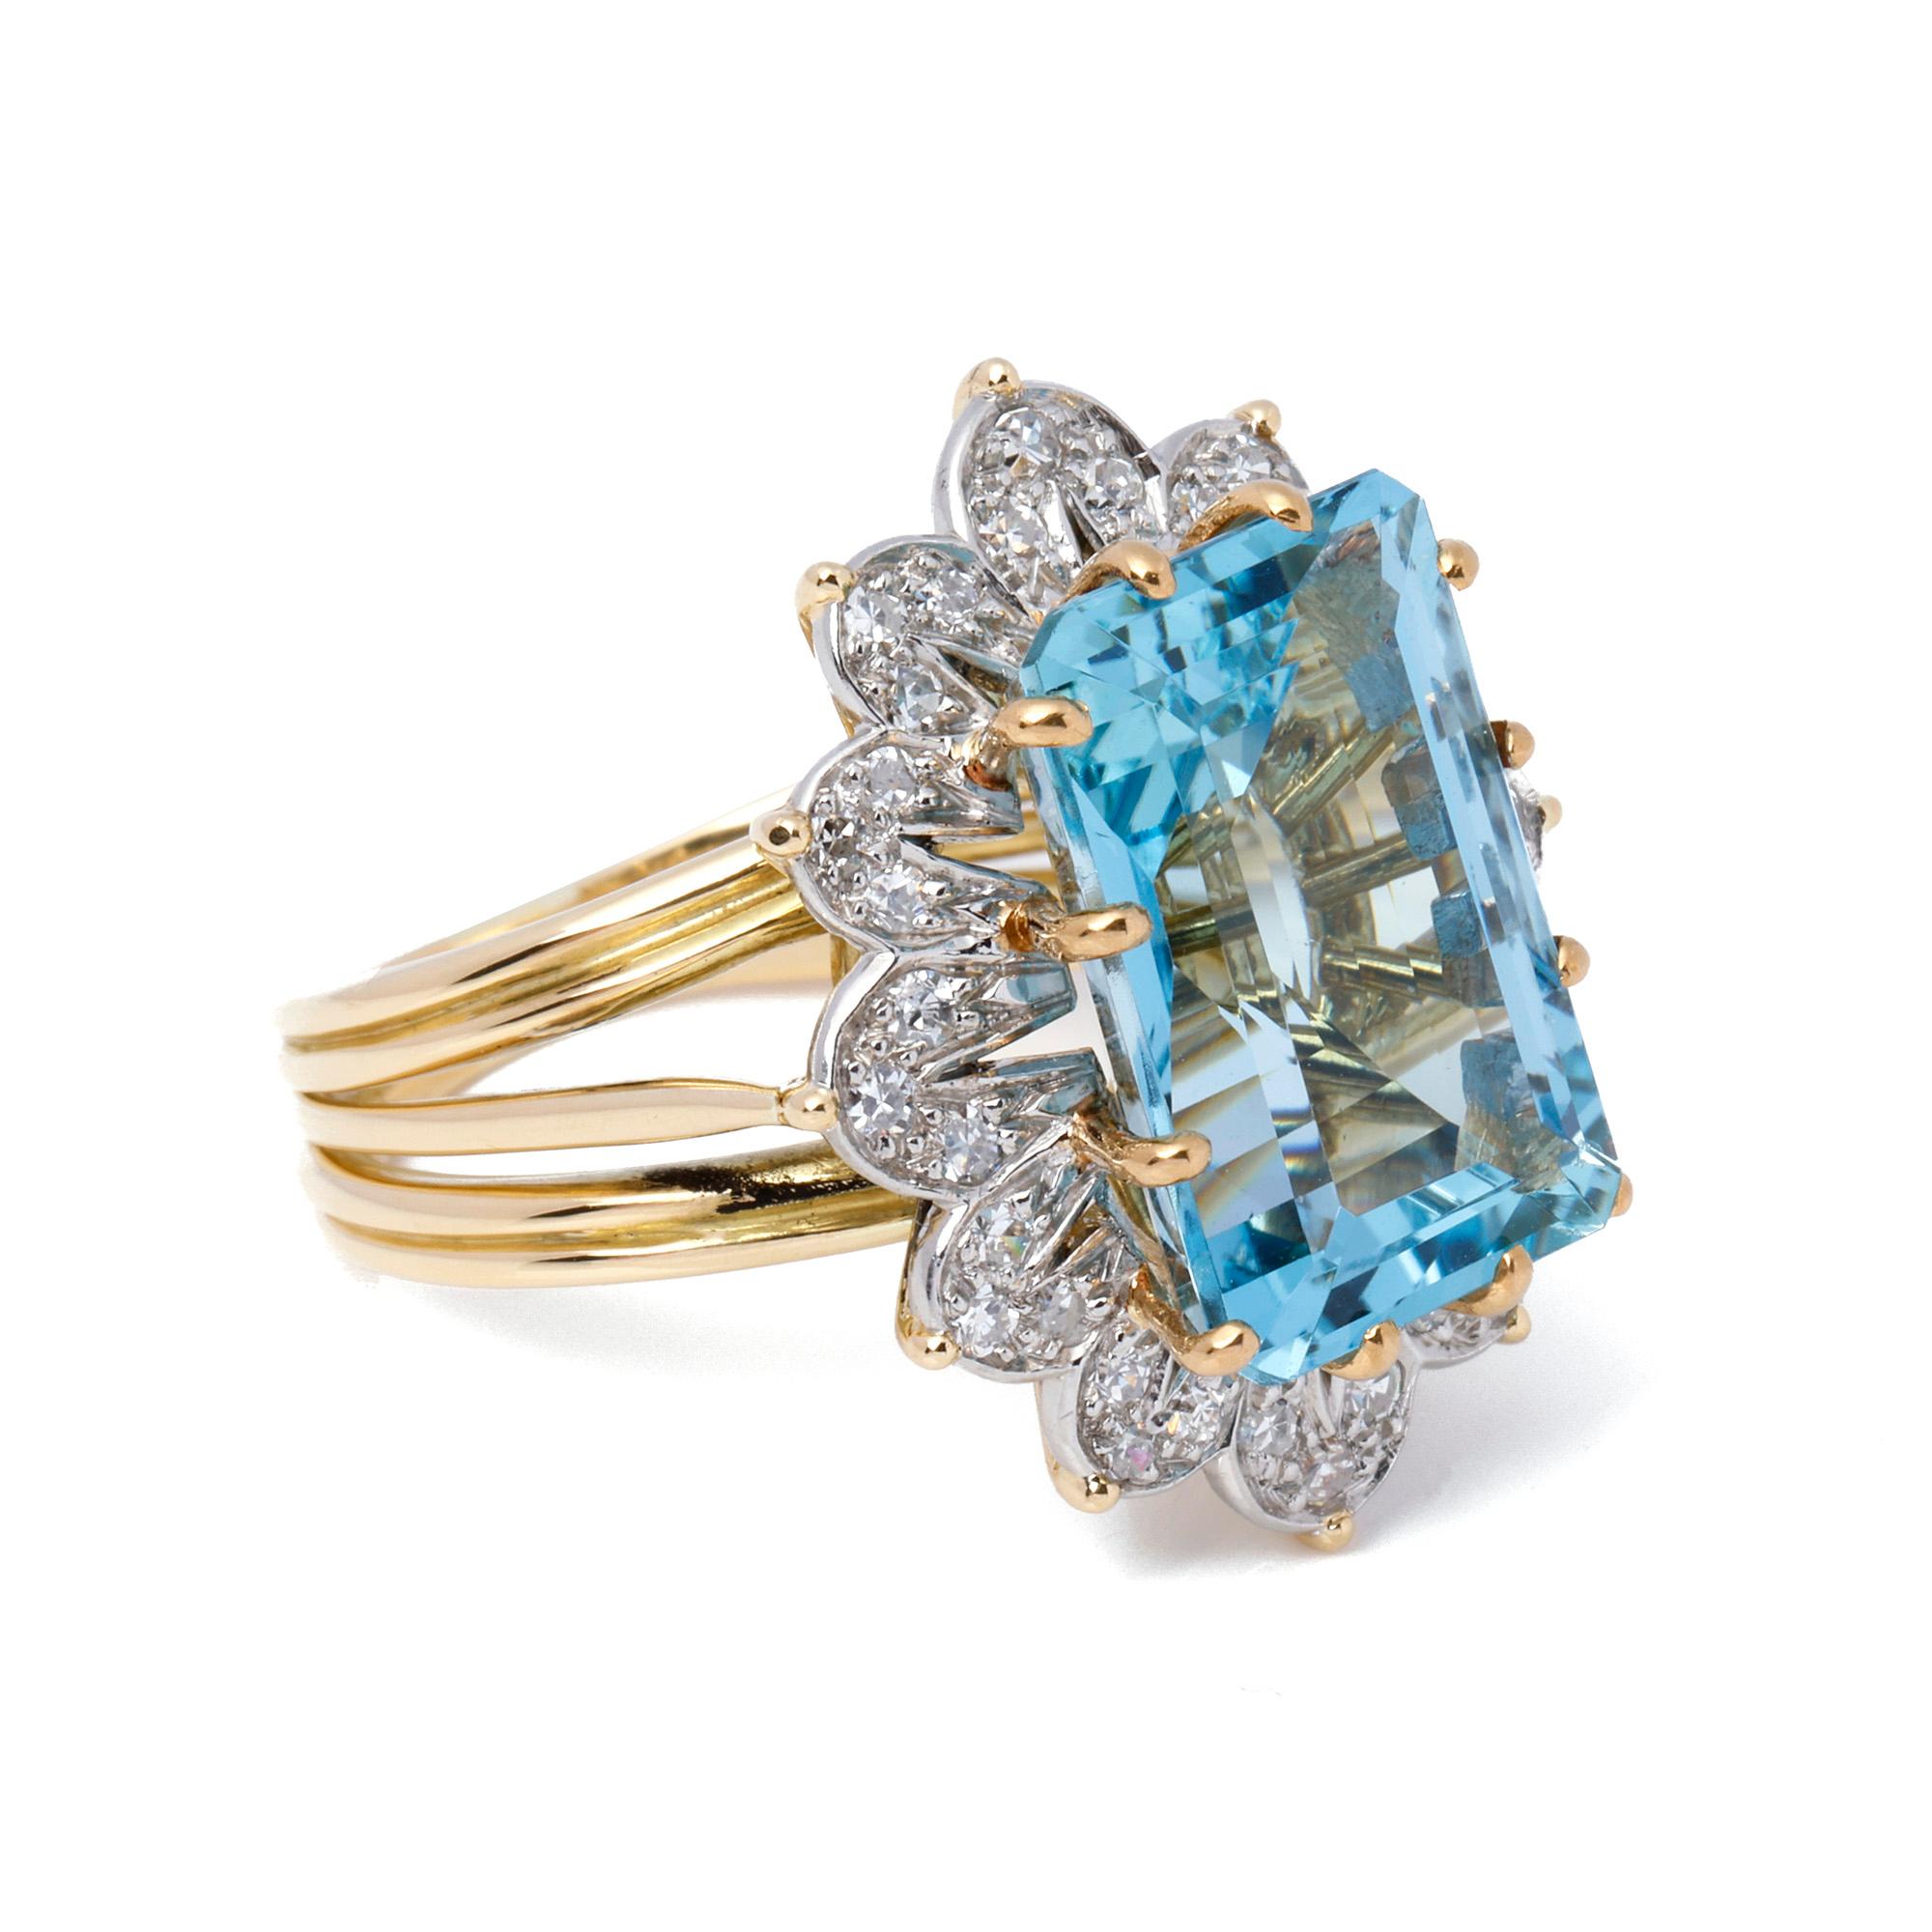 This ring, signed Mtd Cartier, features a central emerald cut aquamarine stone measuring approximately 16.45mm x 10.75mm surrounded by 36 single cut diamonds within a bi colour ring setting. UK ring size O. EU ring size 55. US ring size 7 1/4.